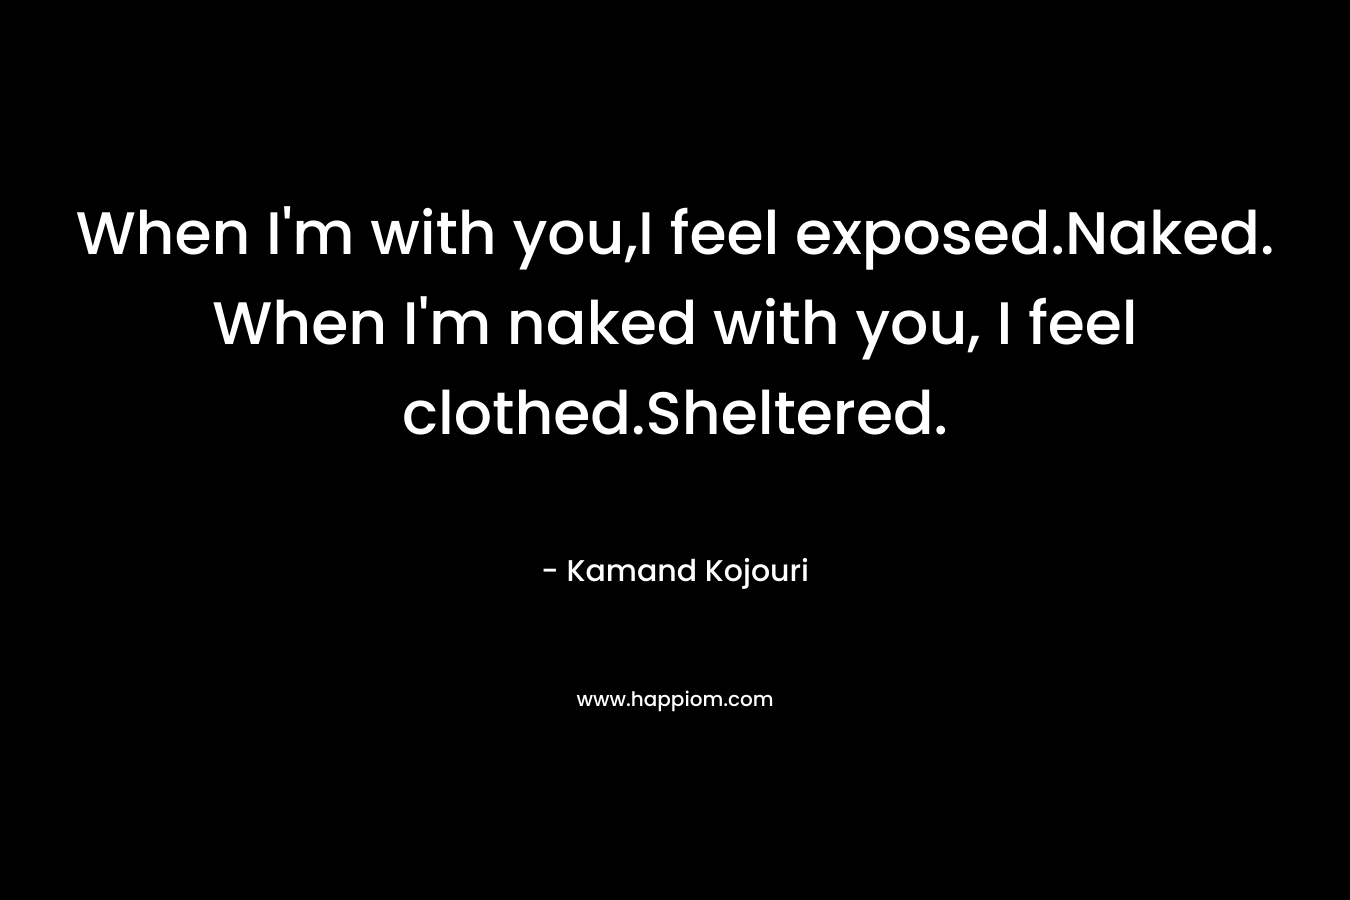 When I'm with you,I feel exposed.Naked. When I'm naked with you, I feel clothed.Sheltered.